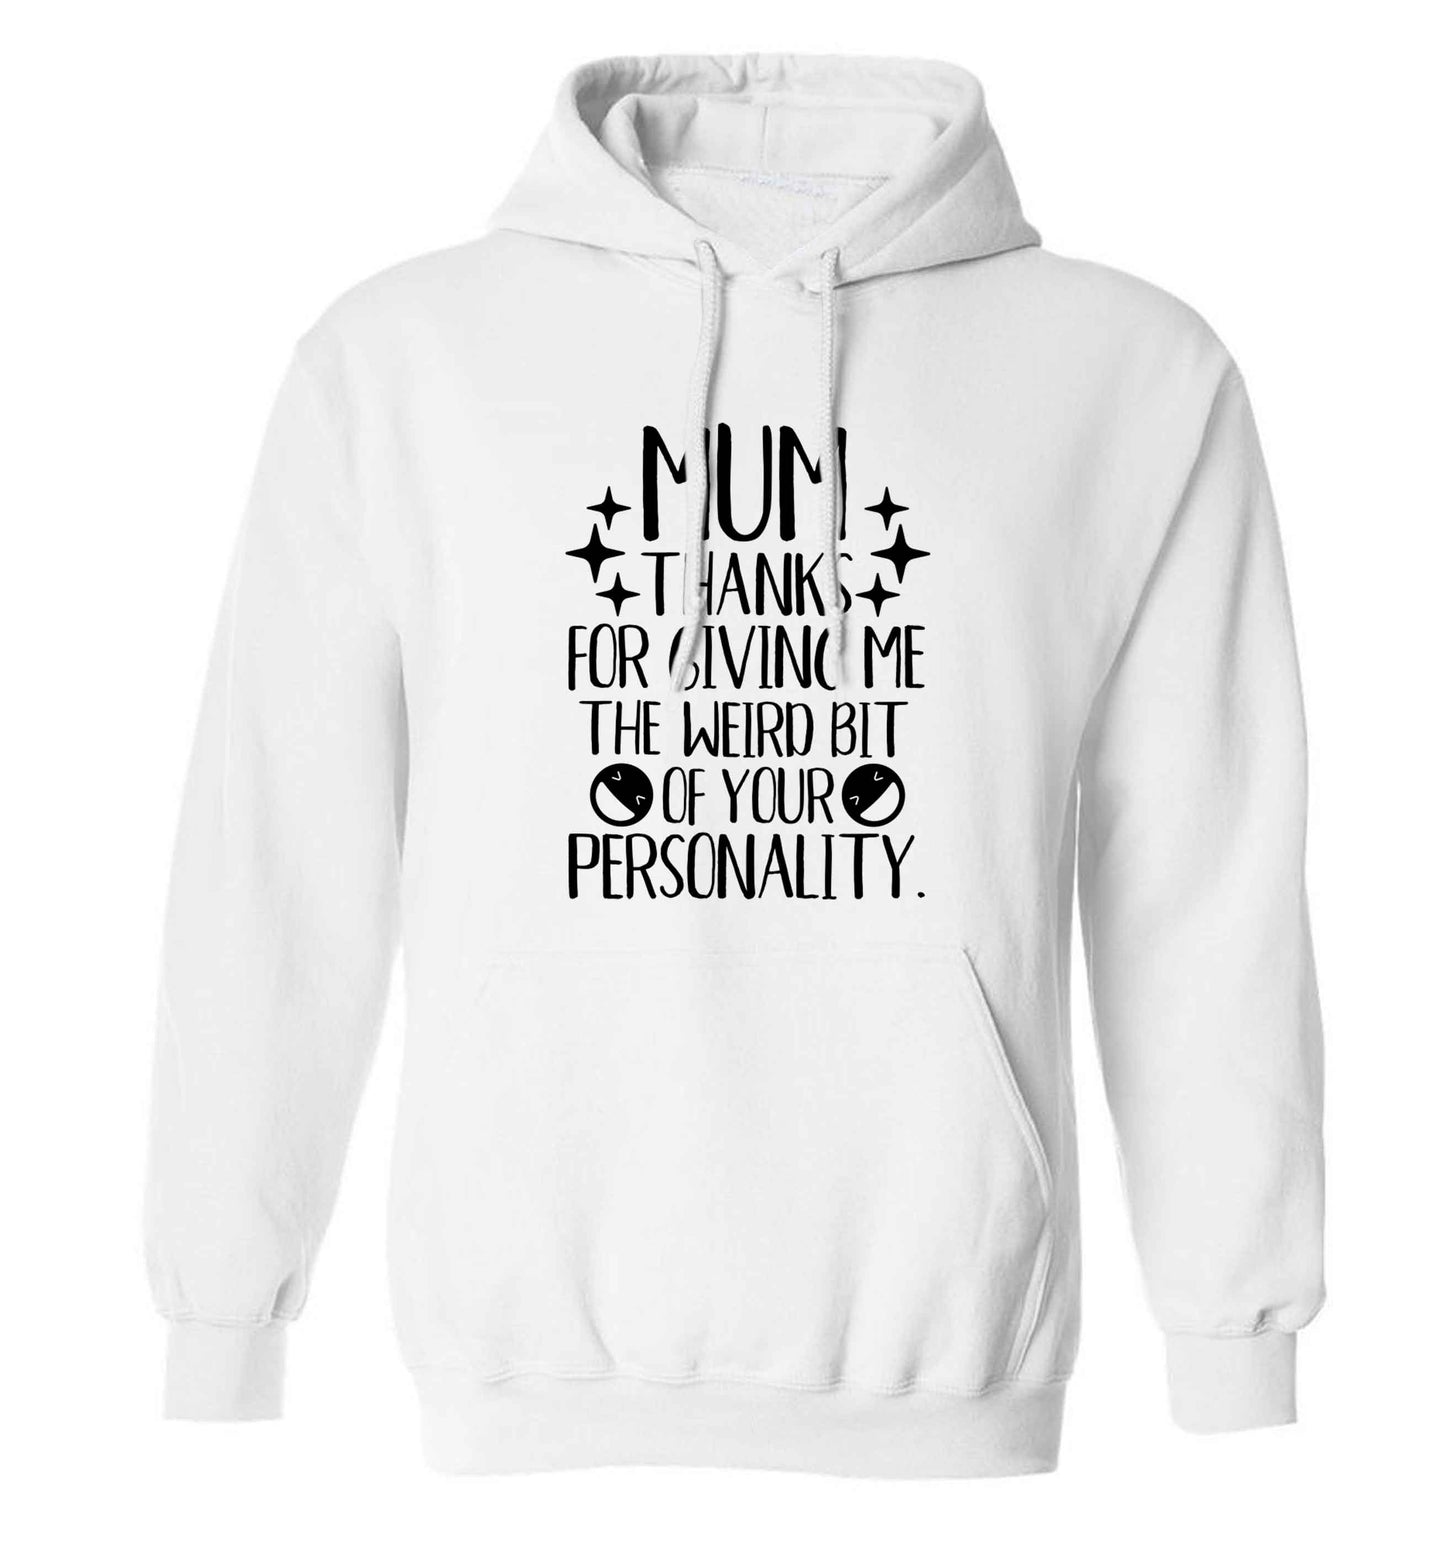 Mum thanks for giving me the weird bit of your personality adults unisex white hoodie 2XL